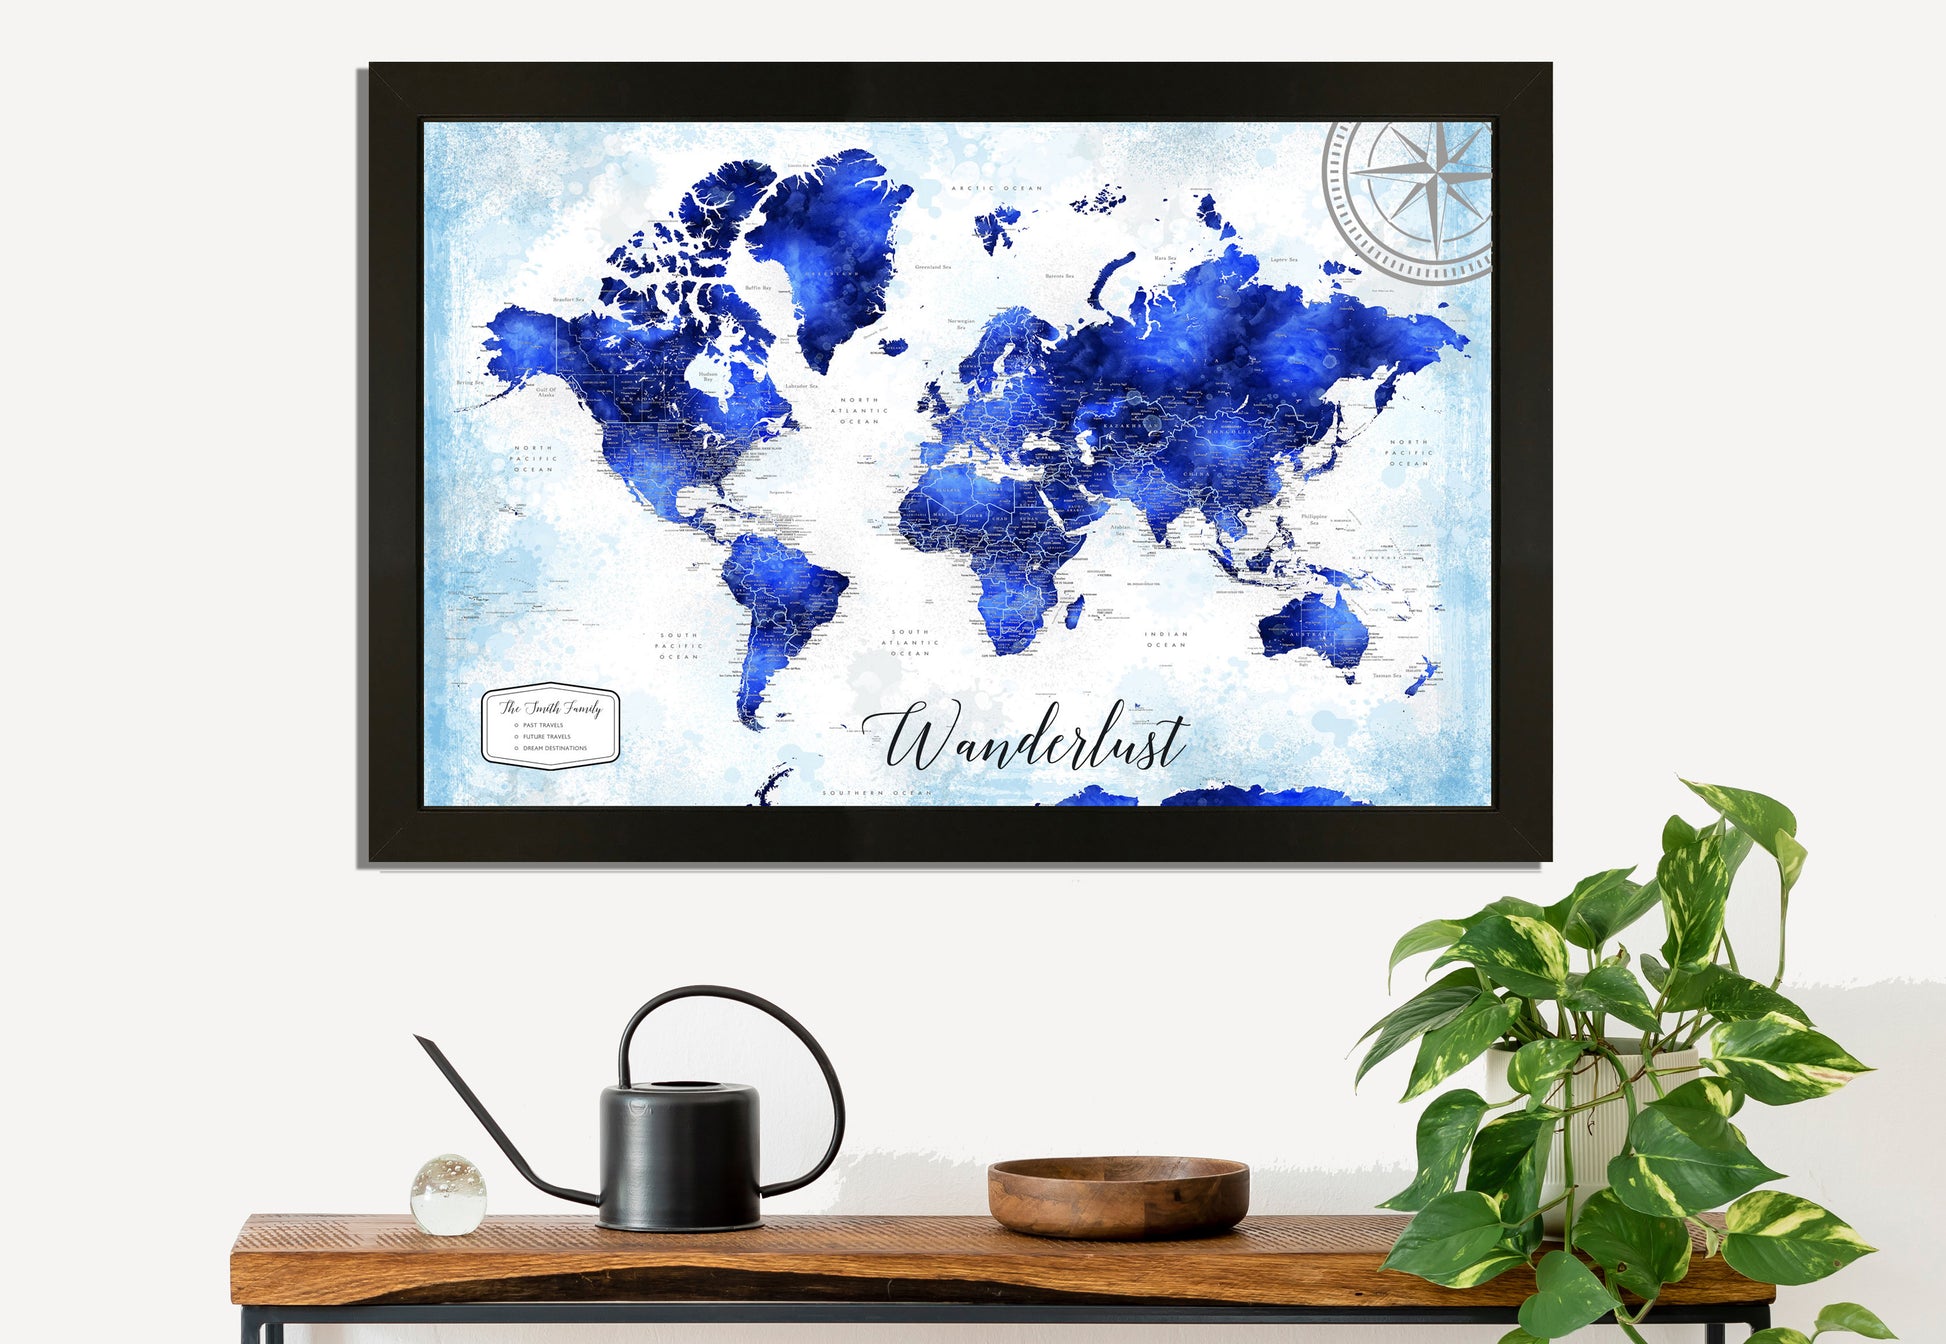 Personalized USA Magnetic Travel Maps